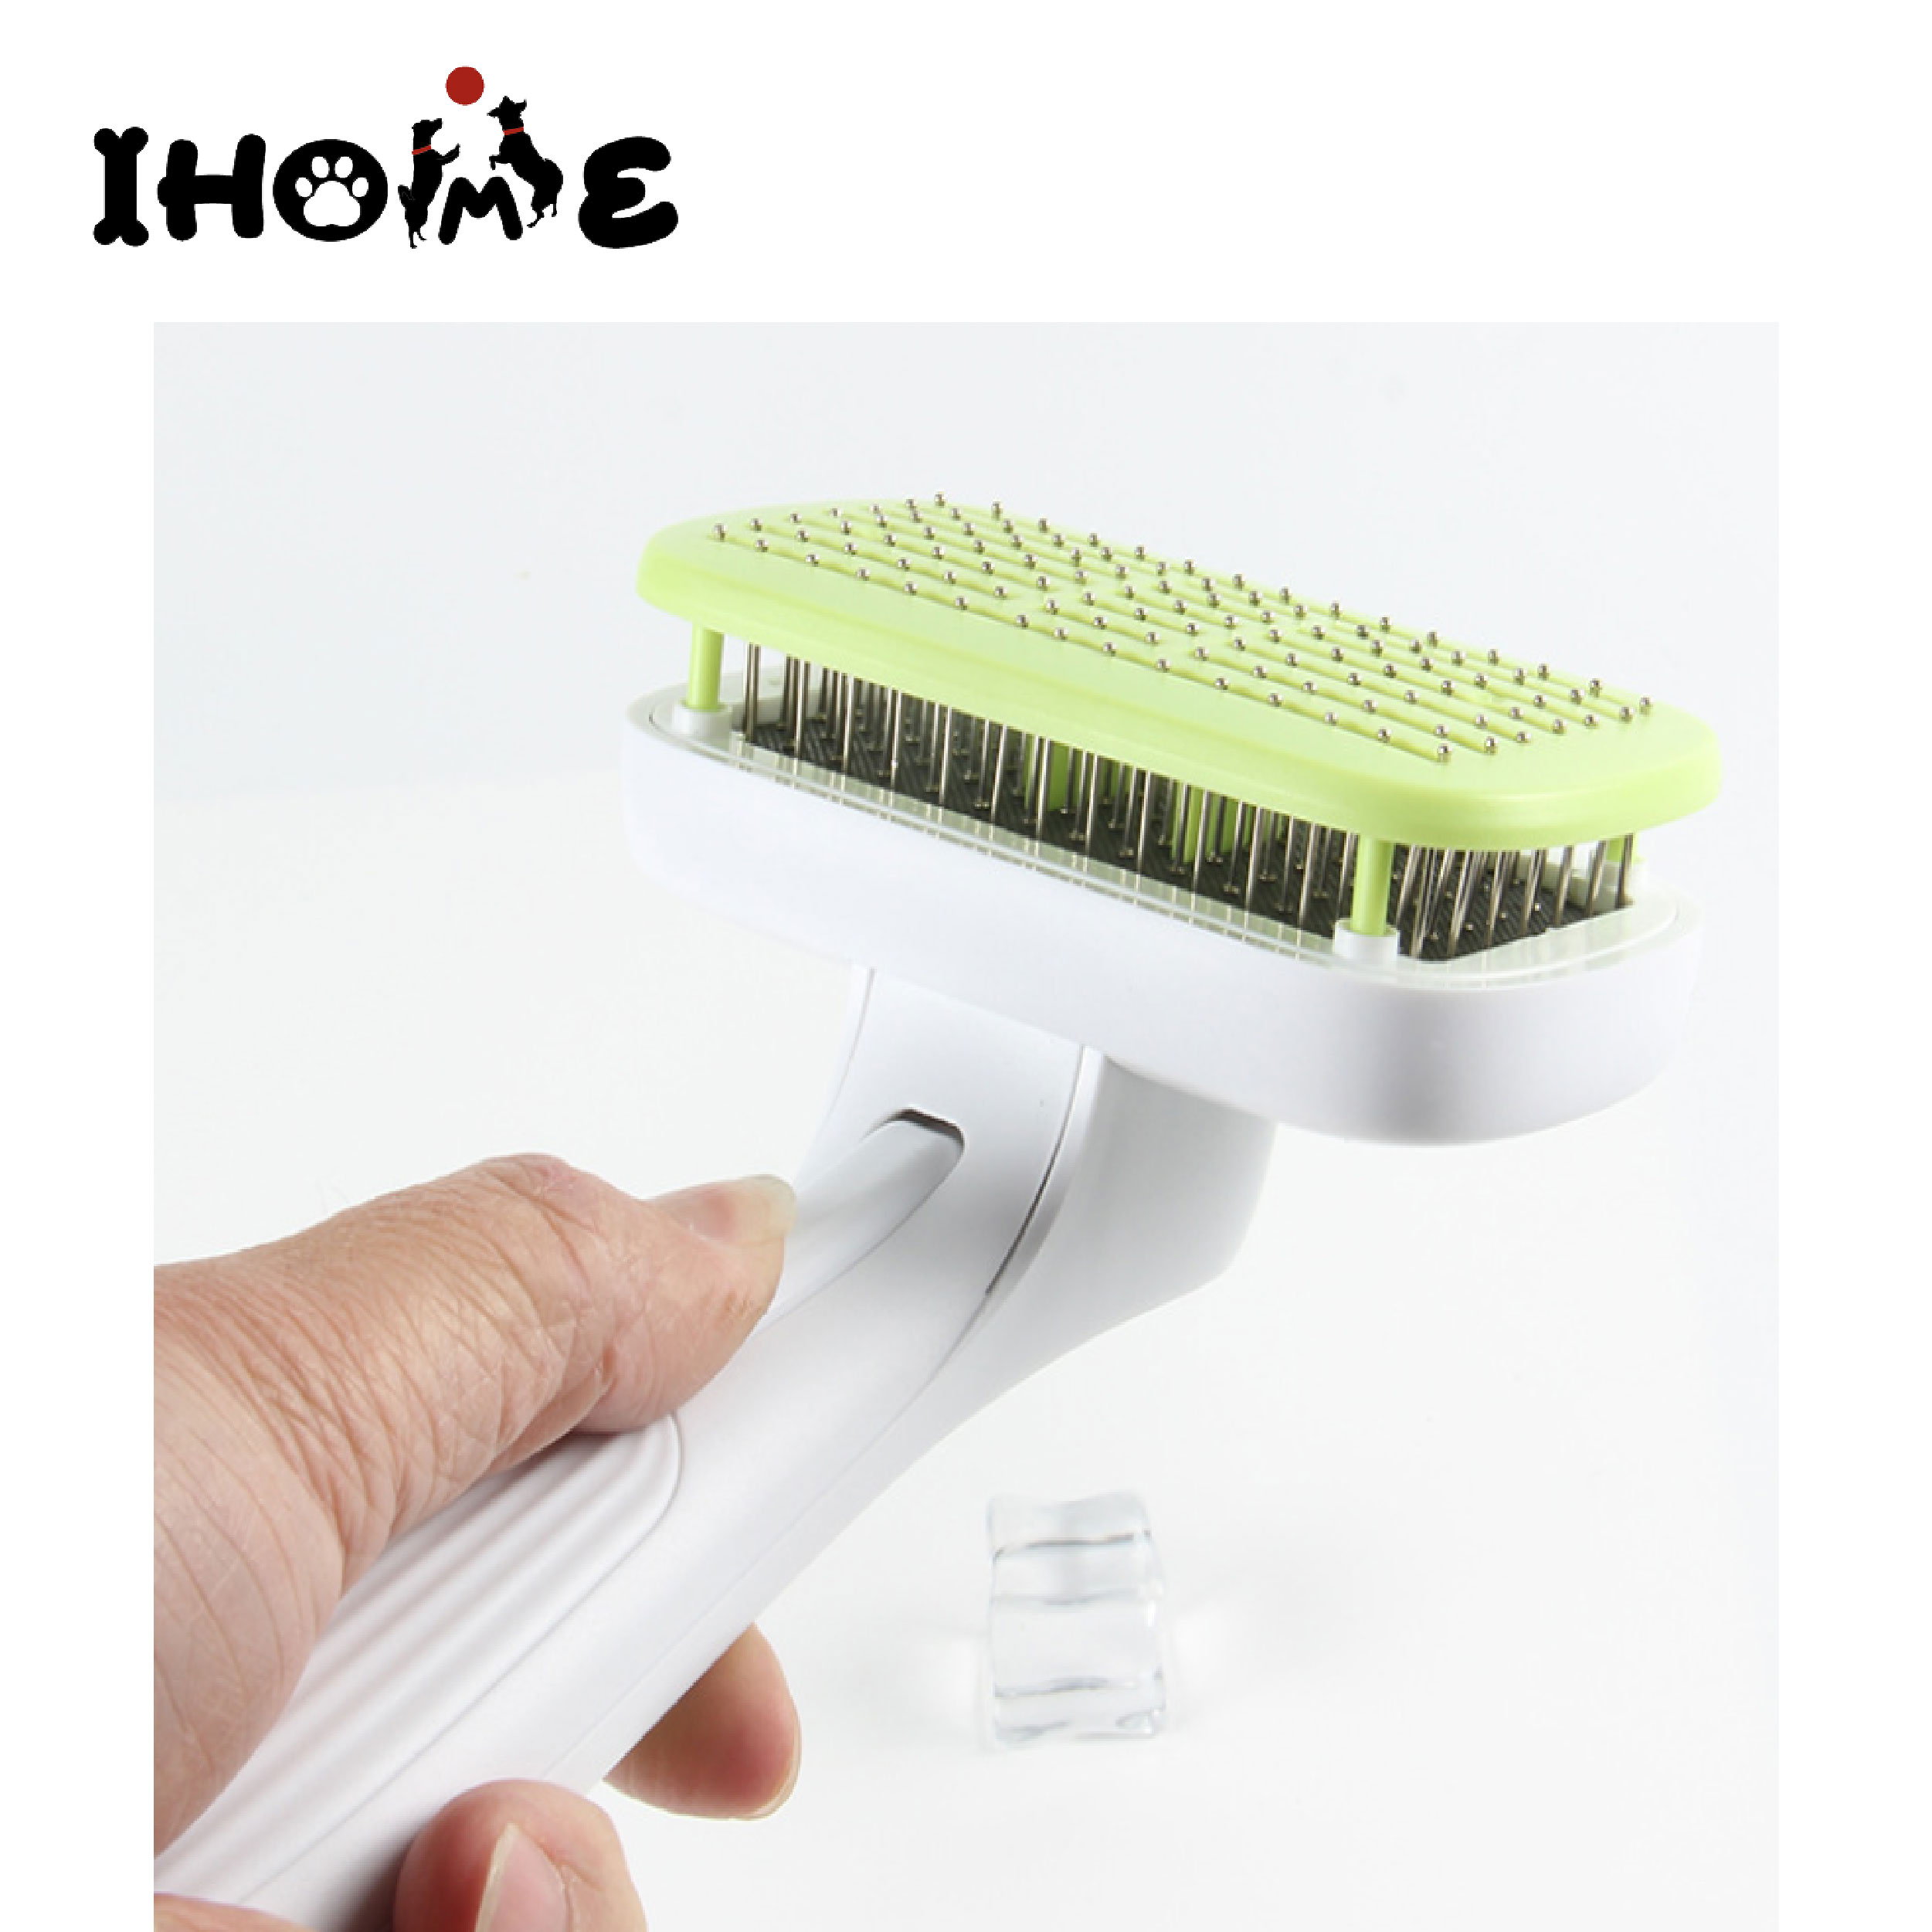 Low price for Puppies Foldable Bowl - Long Hair Pet Grooming Brush, Cat&dog cleaning Comb,dog|cat hair remover,pets hair removal,All-In-One Self Cleaning Slicker, – Ihome